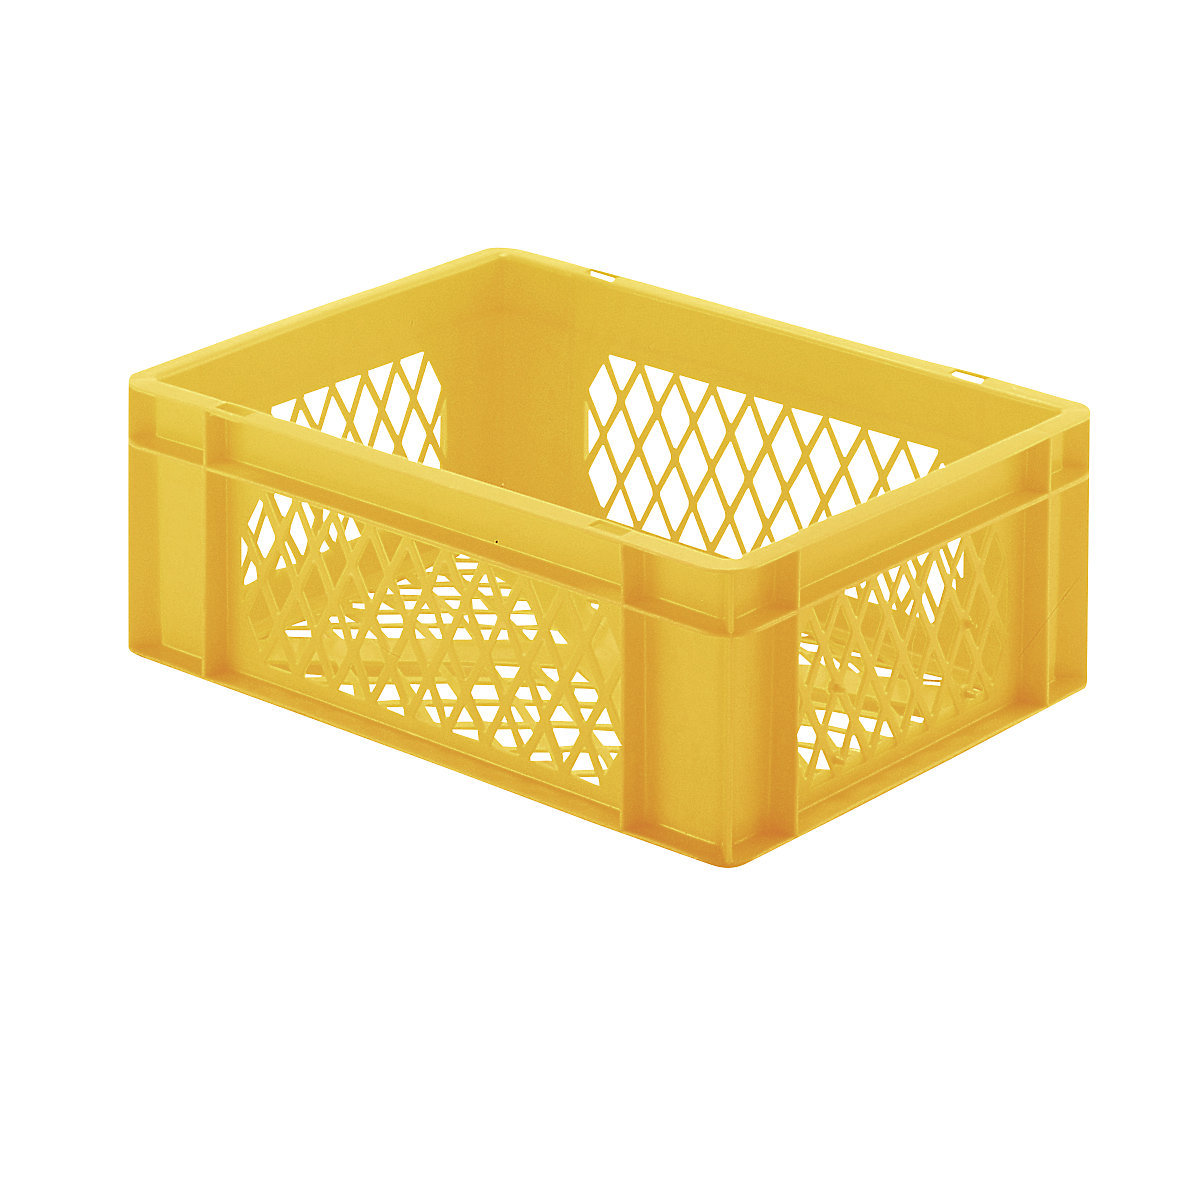 Euro stacking container, perforated walls and base, LxWxH 400 x 300 x 145 mm, yellow, pack of 5